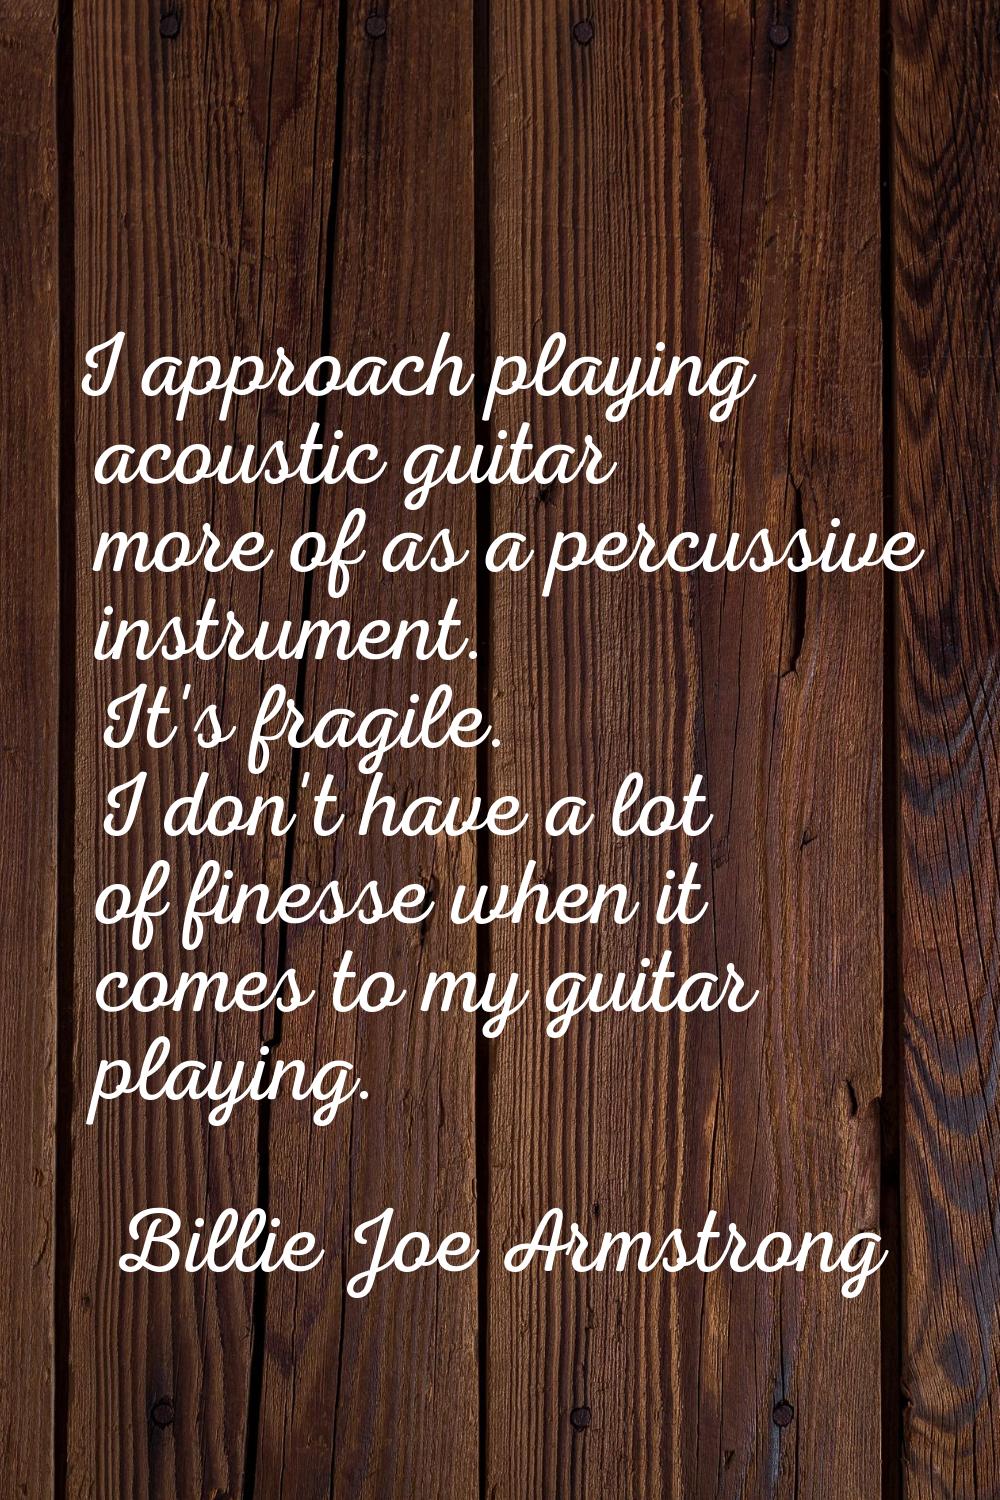 I approach playing acoustic guitar more of as a percussive instrument. It's fragile. I don't have a